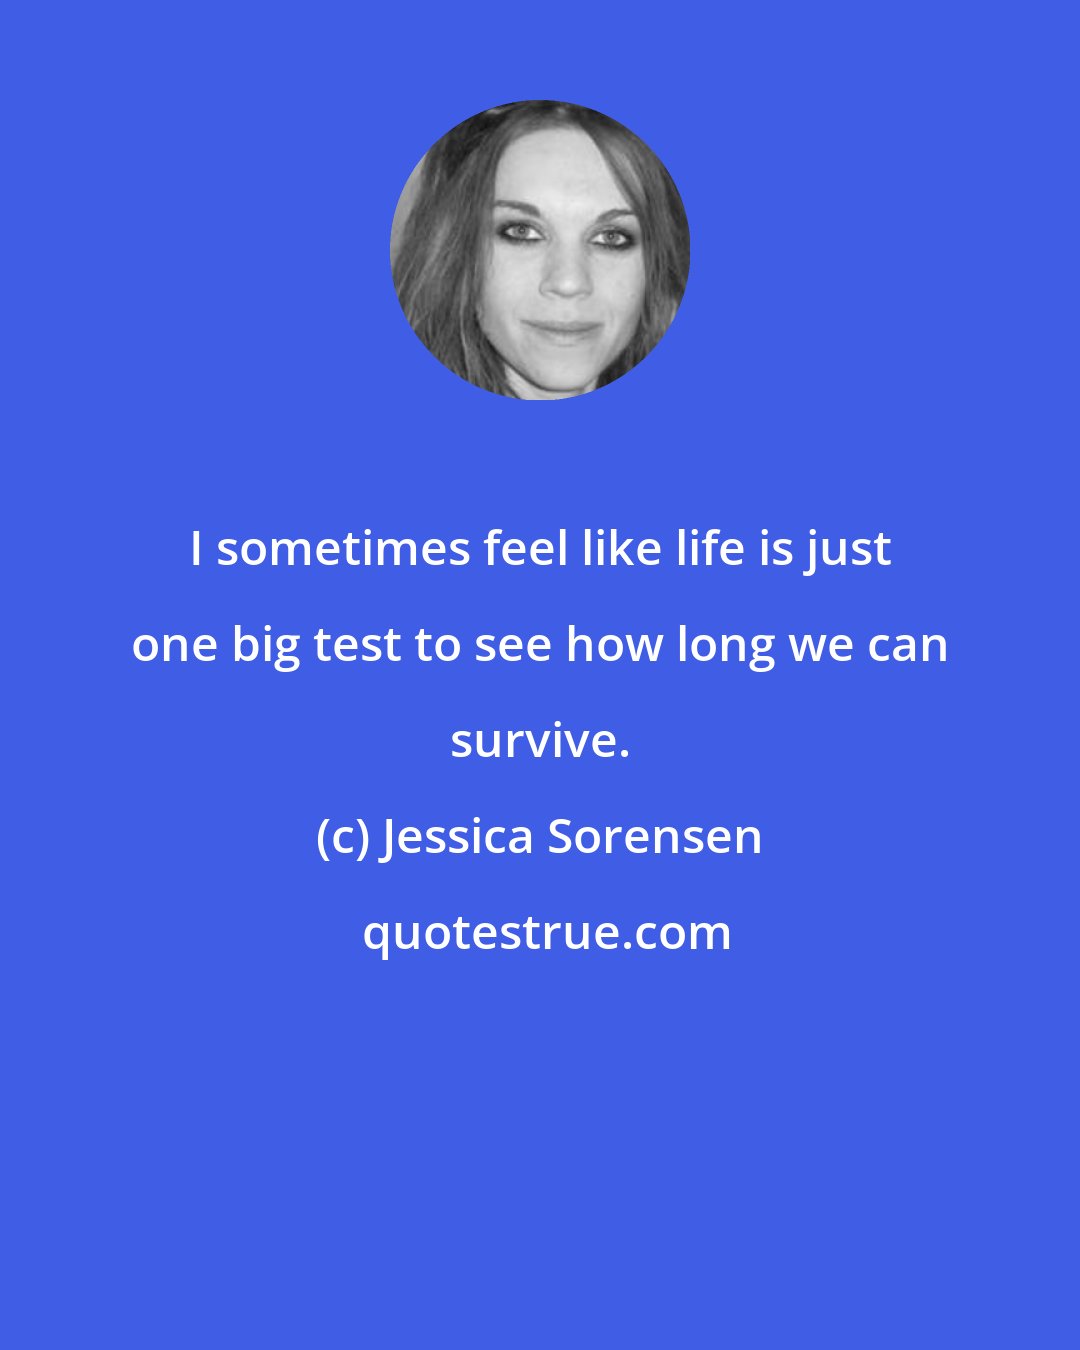 Jessica Sorensen: I sometimes feel like life is just one big test to see how long we can survive.